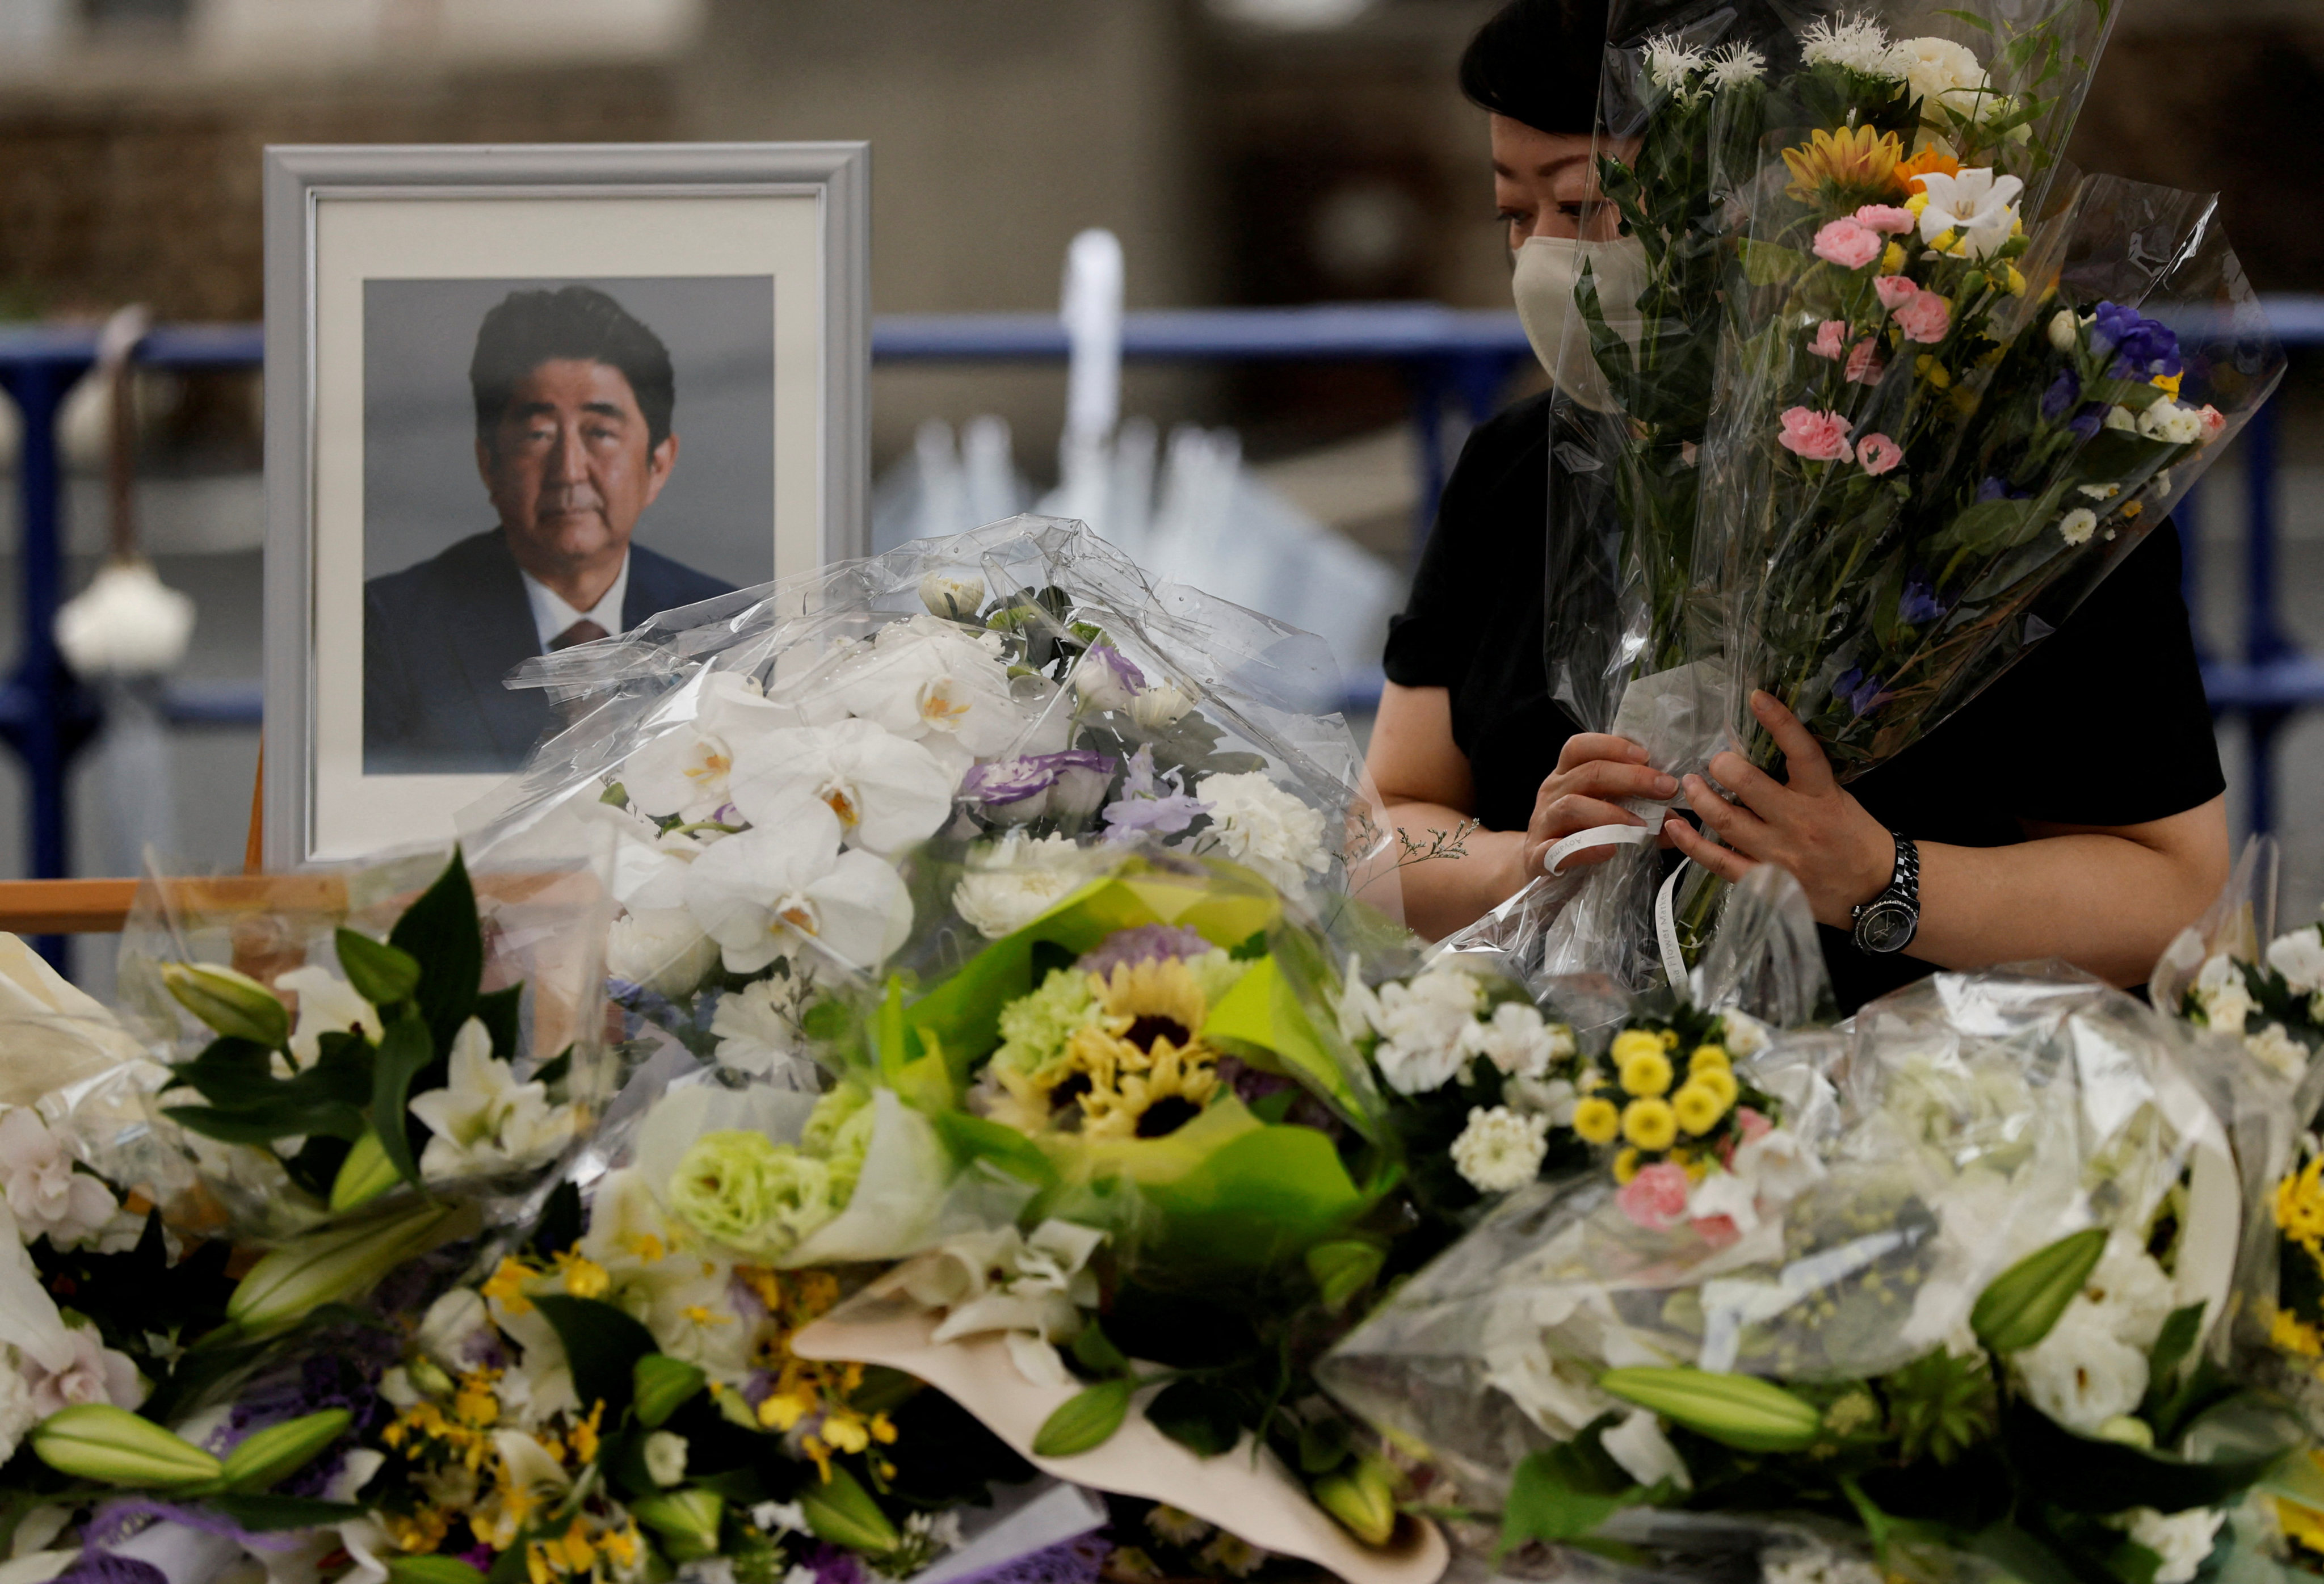 A mourner offers flowers next to a picture of late former Japanese Prime Minister Shinzo Abe, who was shot while campaigning for a parliamentary election, on the day to mark a week after his assassination at the Liberal Democratic Party headquarters, in Tokyo on July 15. Photo: Reuters